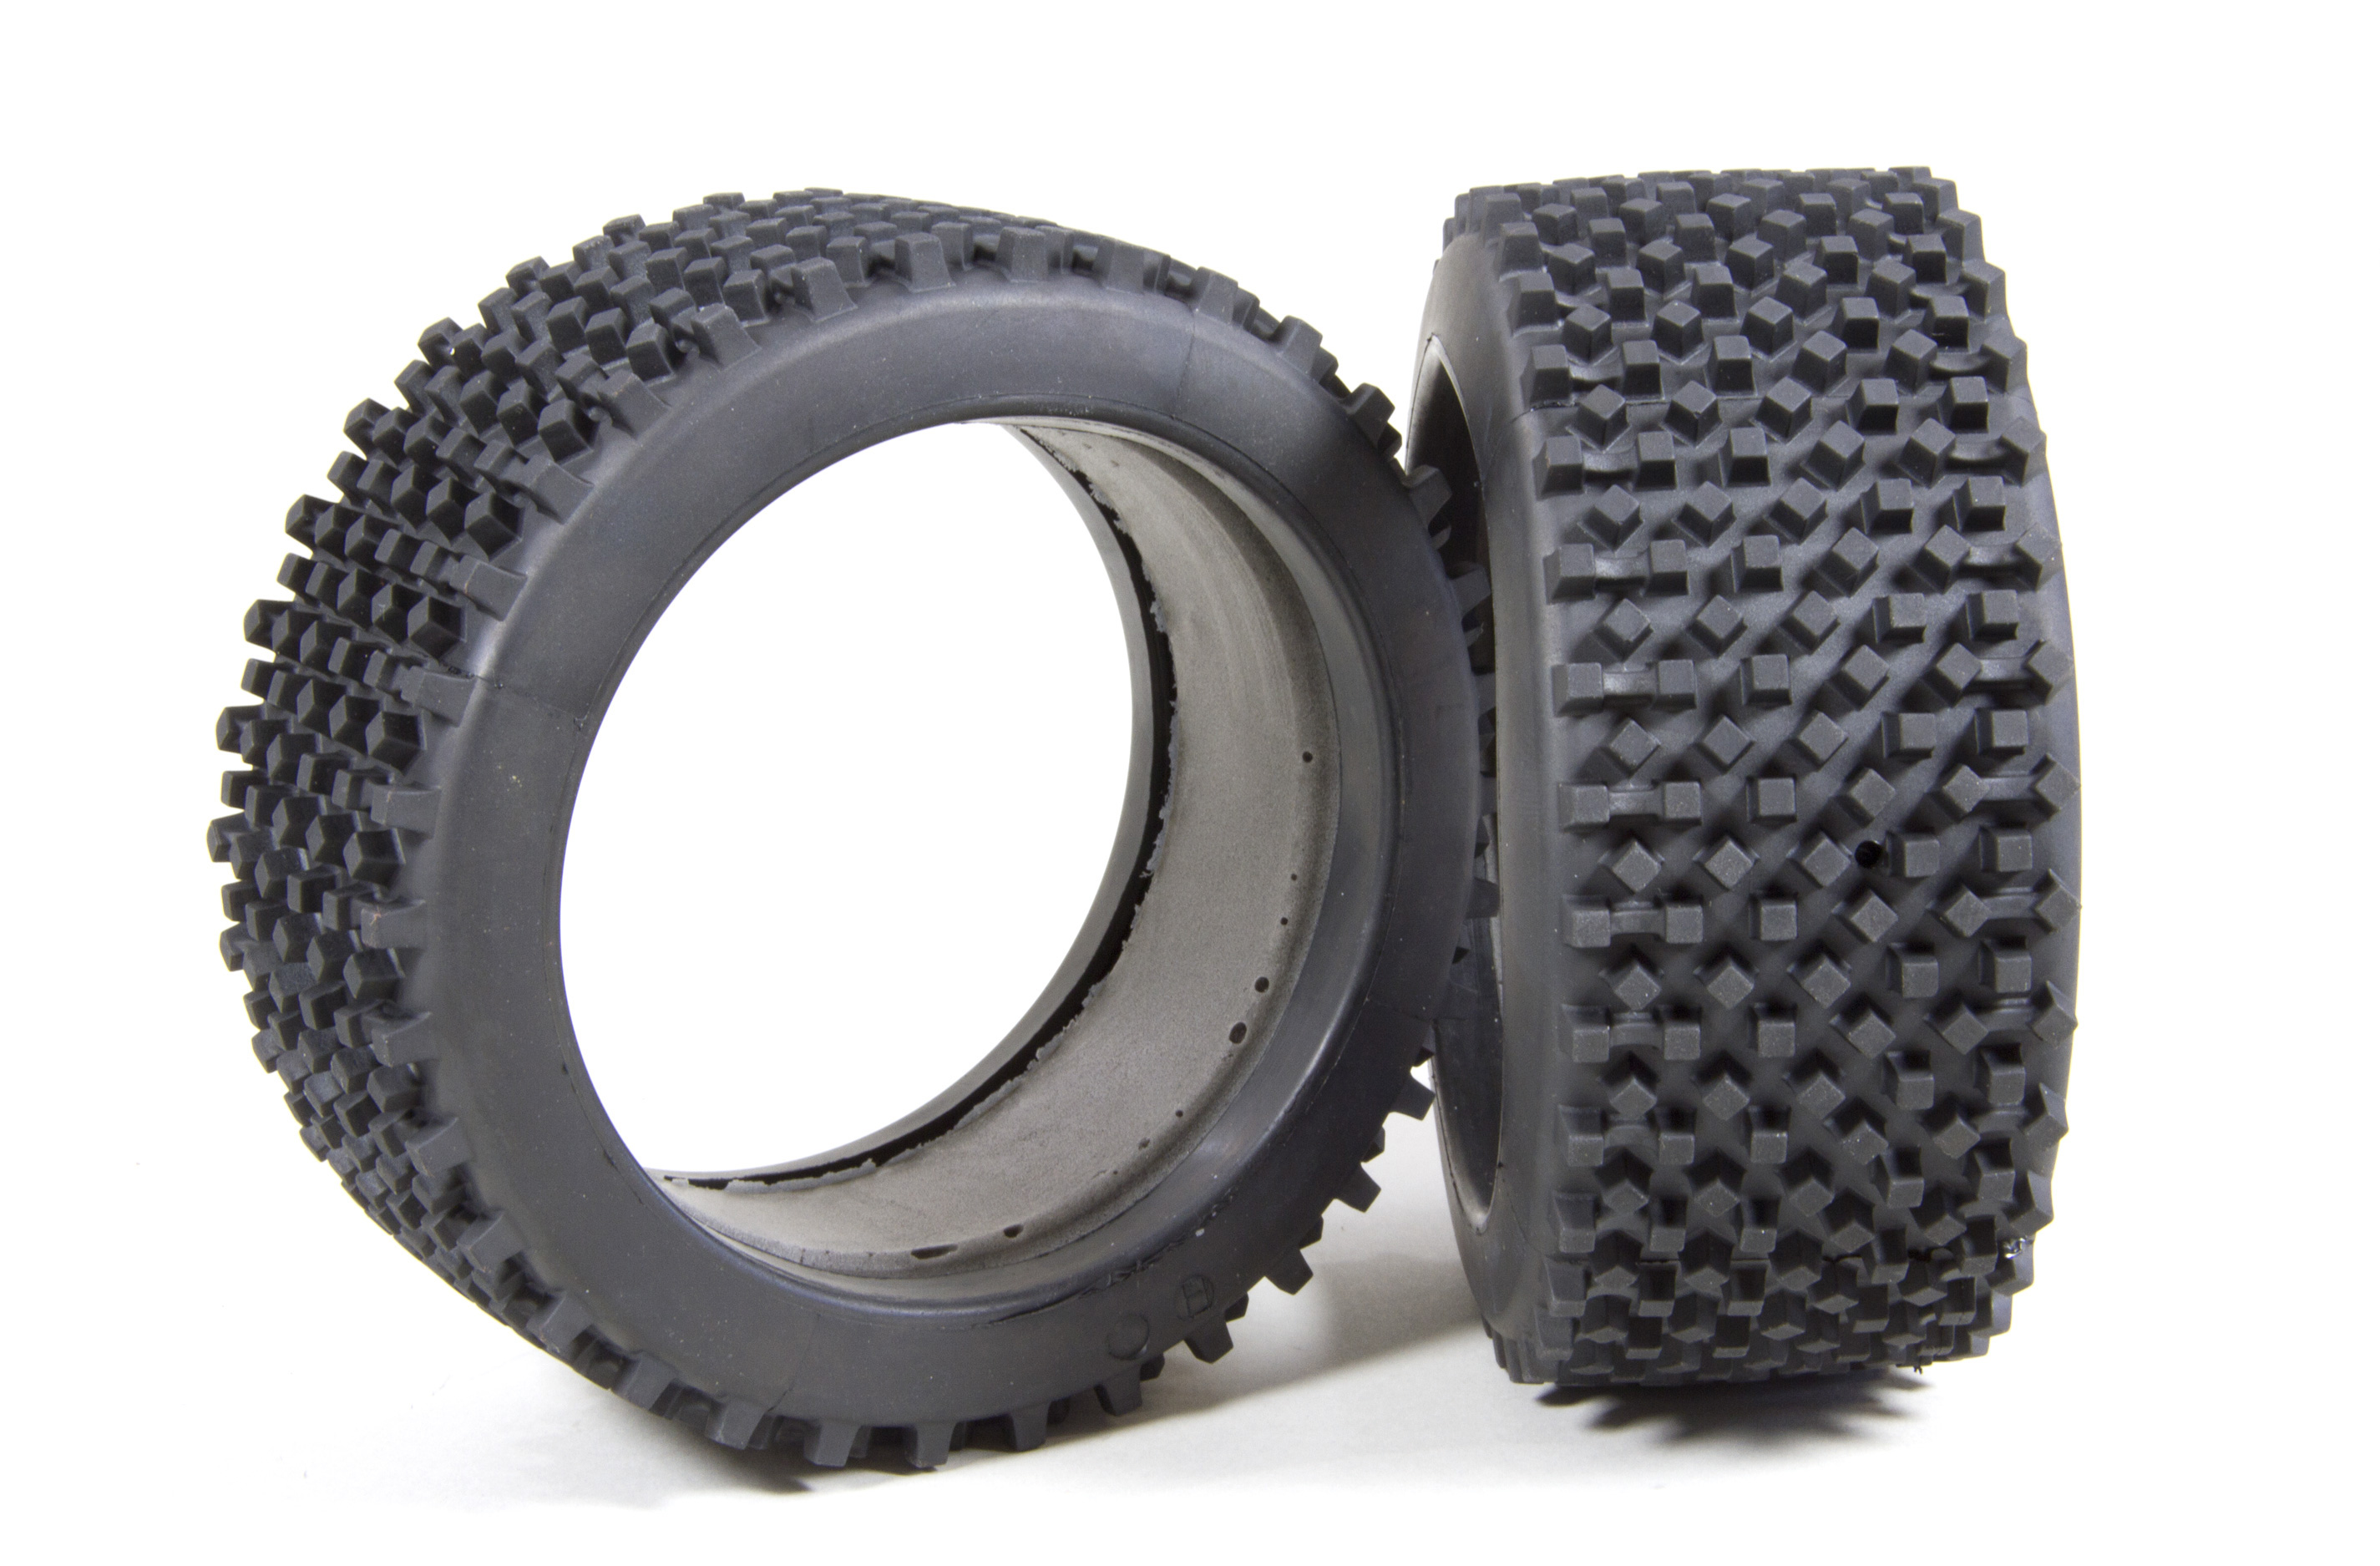 67214/01 FG Mini block S / OR tires with inserts